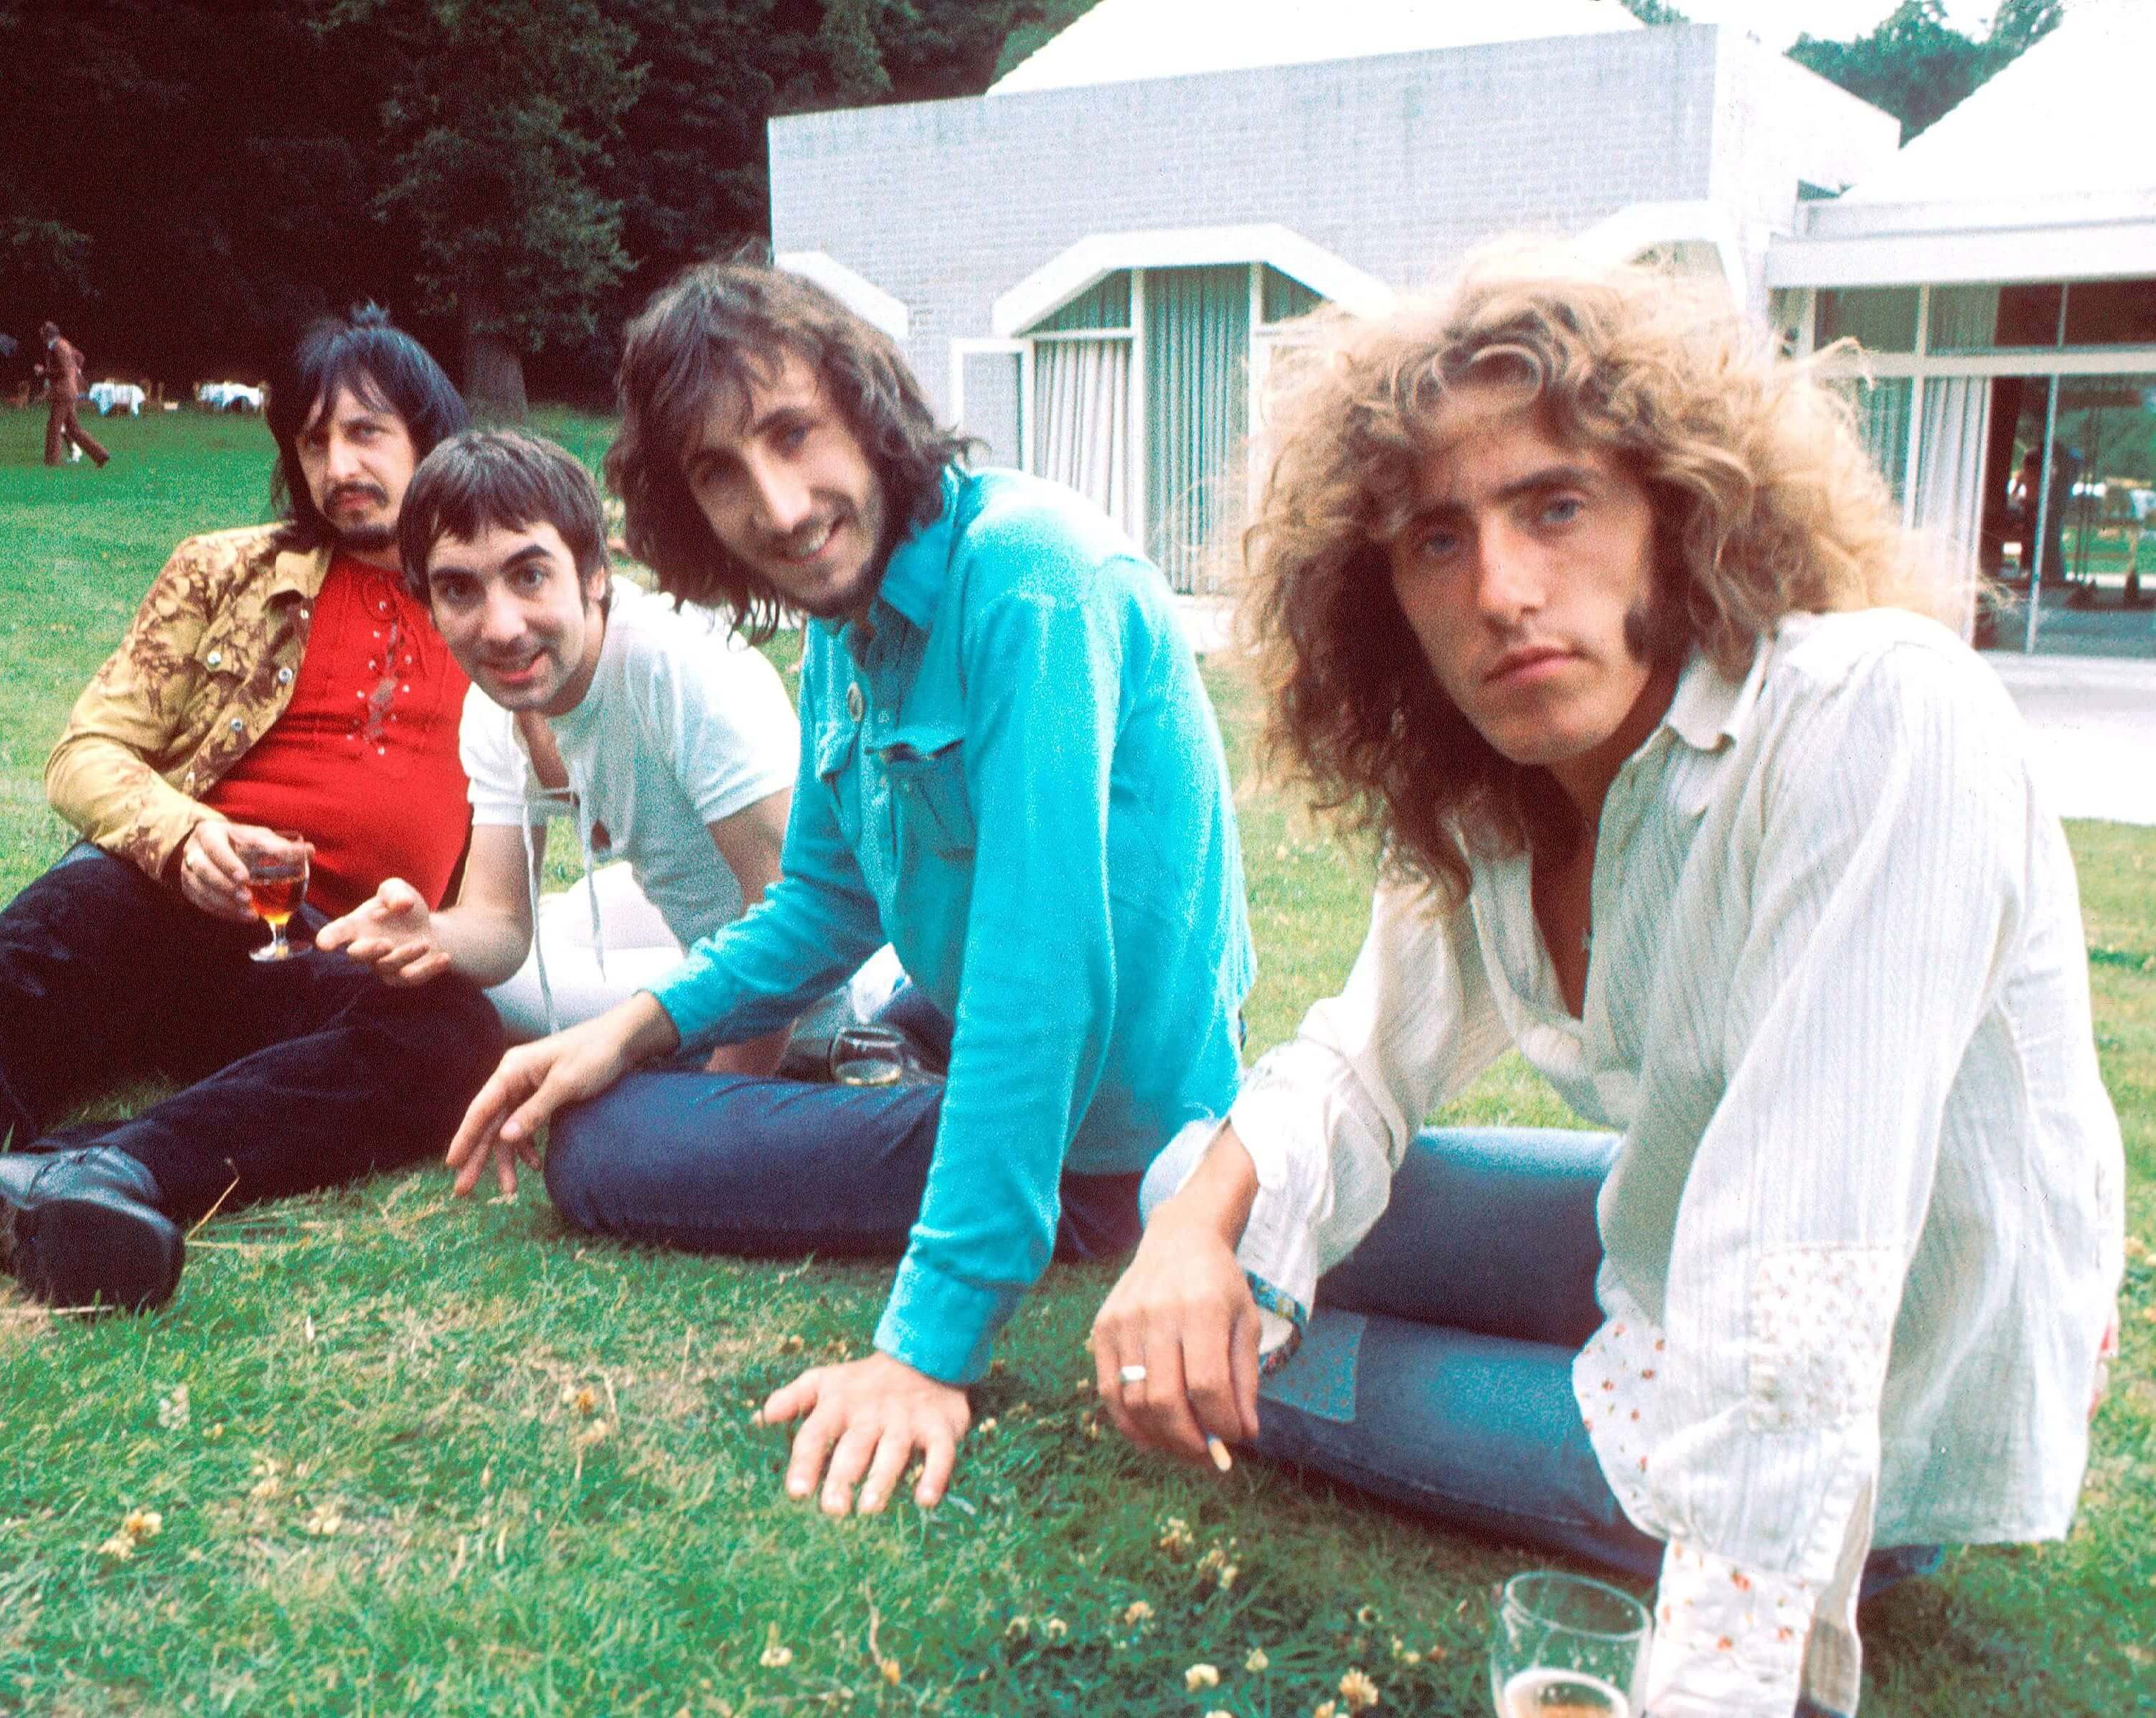 The Who during the 'Tommy' era